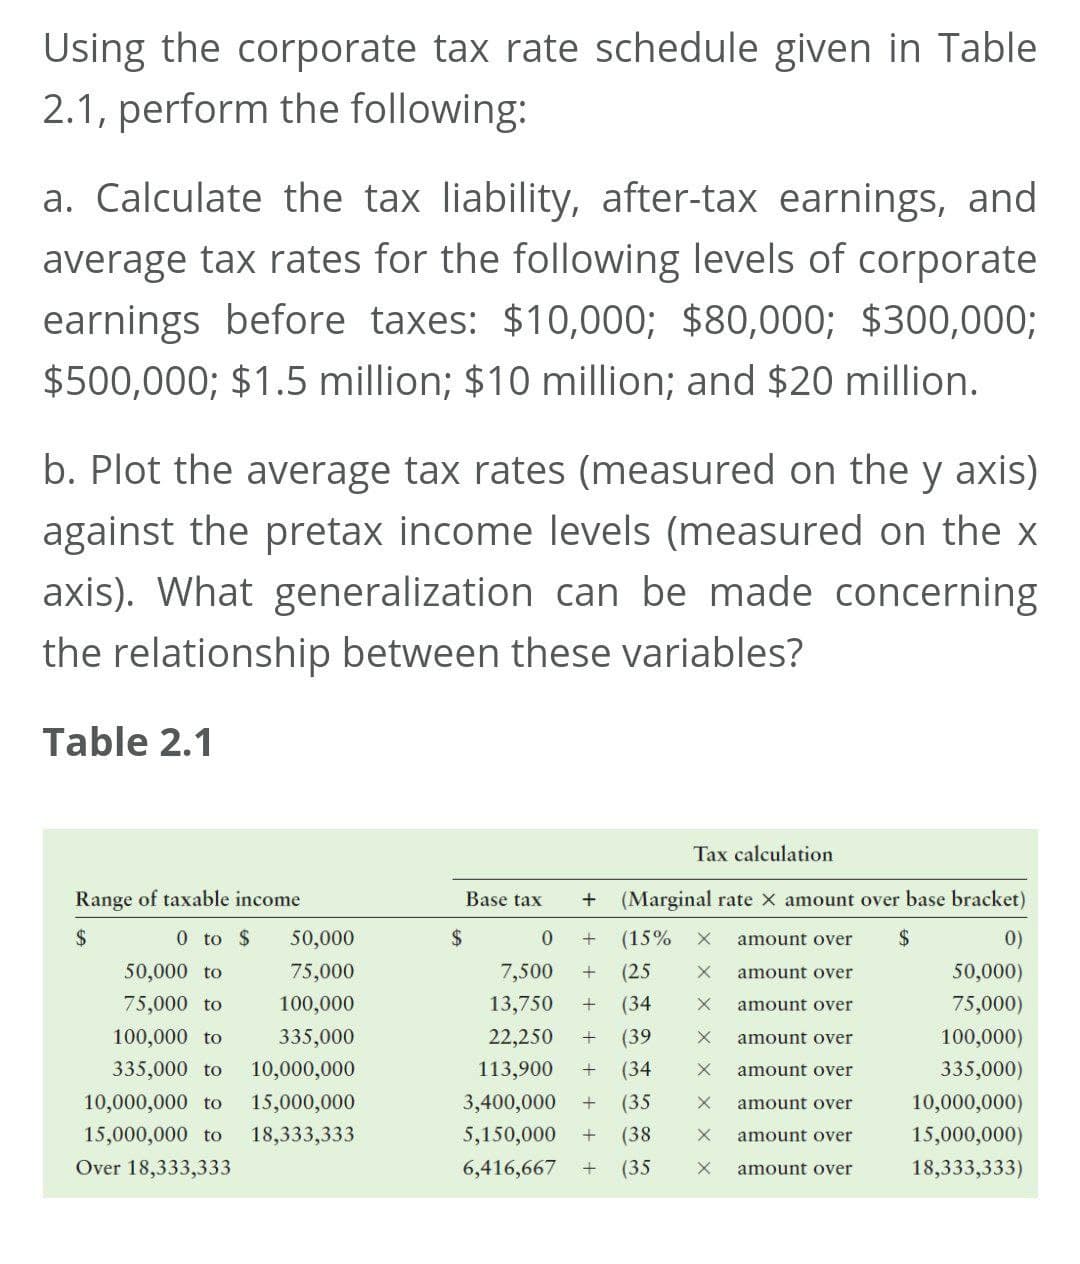 Using the corporate tax rate schedule given in Table
2.1, perform the following:
a. Calculate the tax liability, after-tax earnings, and
average tax rates for the following levels of corporate
earnings before taxes: $10,000; $80,000; $300,000;
$500,000; $1.5 million; $10 million; and $20 million.
b. Plot the average tax rates (measured on the y axis)
against the pretax income levels (measured on the x
axis). What generalization can be made concerning
the relationship between these variables?
Table 2.1
Tax calculation
Range of taxable income
Base tax
(Marginal rate X amount over base bracket)
2$
0 to $
50,000
$
(15%
amount over
2$
0)
50,000 to
75,000
7,500
(25
amount over
50,000)
75,000 to
100,000
13,750
(34
amount over
75,000)
100,000 to
335,000
22,250
(39
amount over
100,000)
335,000 to
10,000,000
113,900
(34
amount over
335,000)
10,000,000 to
15,000,000
3,400,000
(35
amount over
10,000,000)
15,000,000 to
18,333,333
5,150,000
(38
amount over
15,000,000)
Over 18,333,333
6,416,667
(35
amount over
18,333,333)
